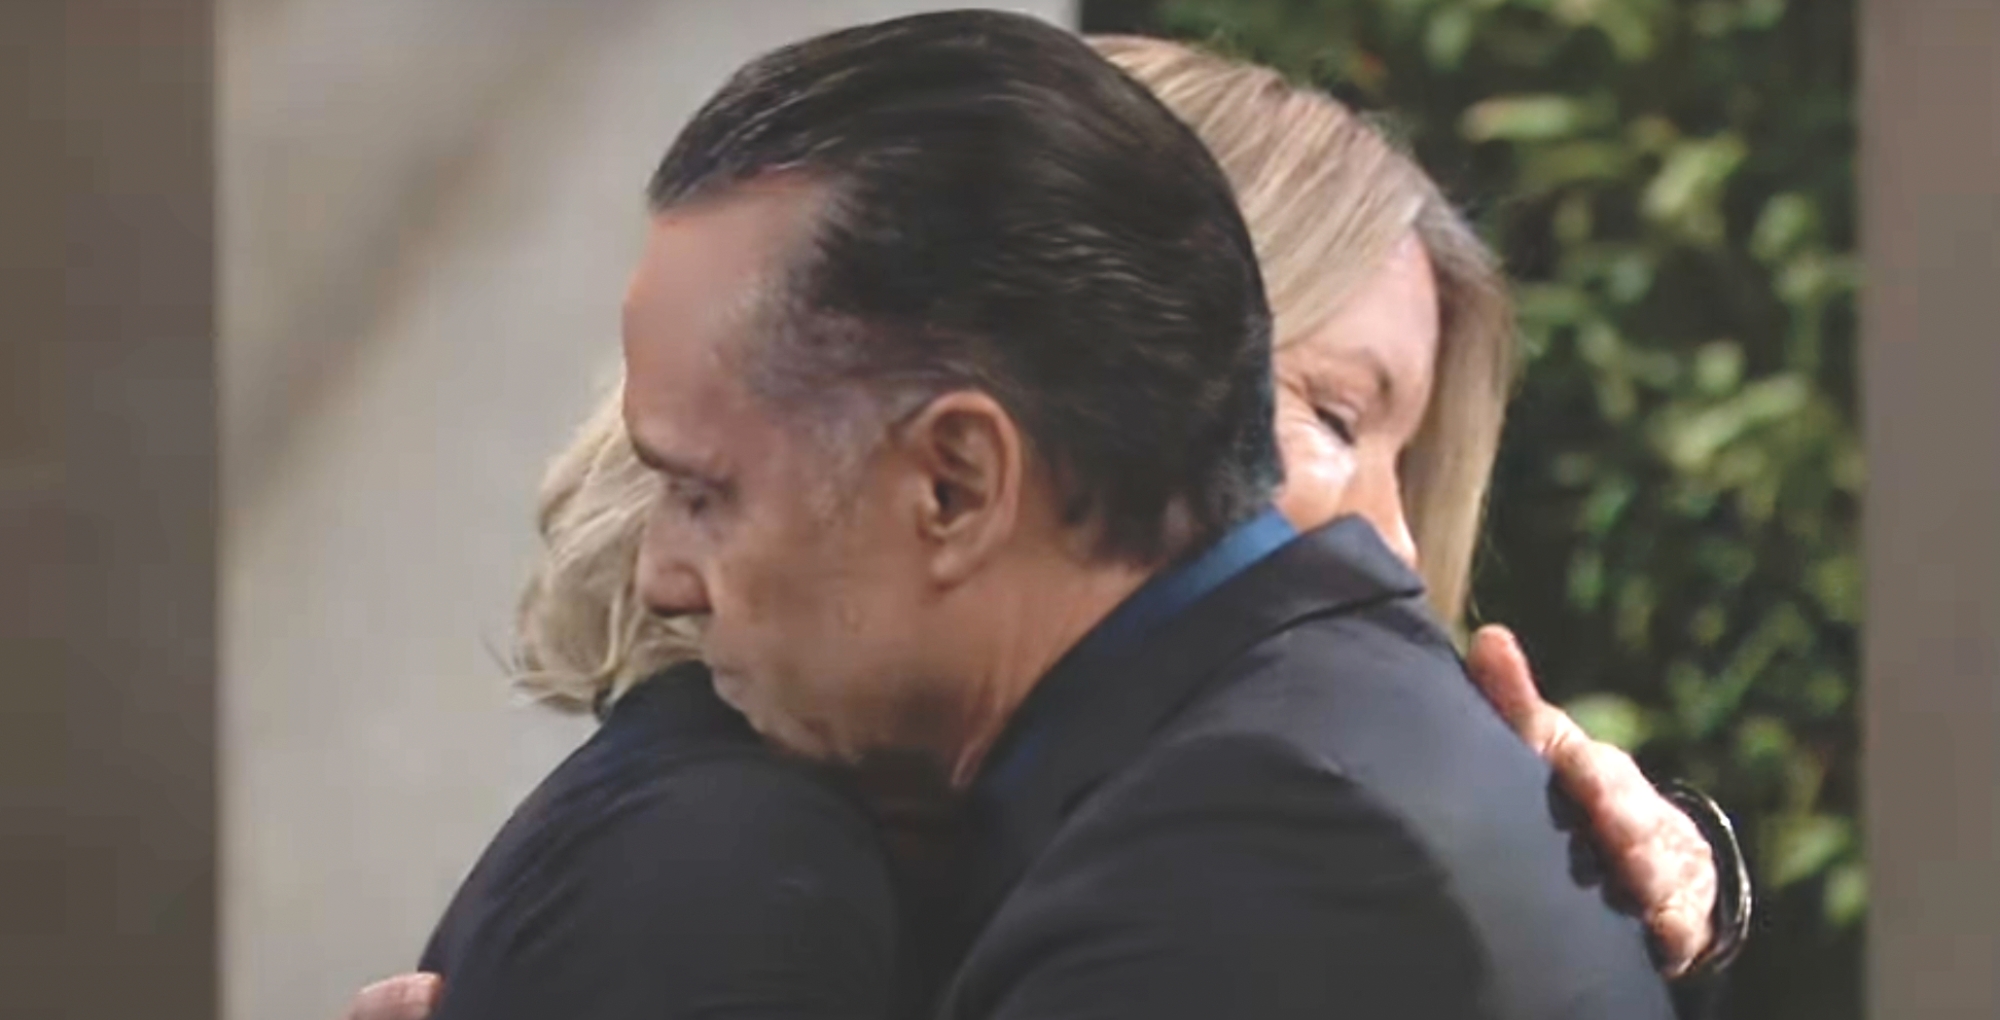 general hospital spoilers nina reeves takes comfort in sonny corinthos's arms as he holds her close